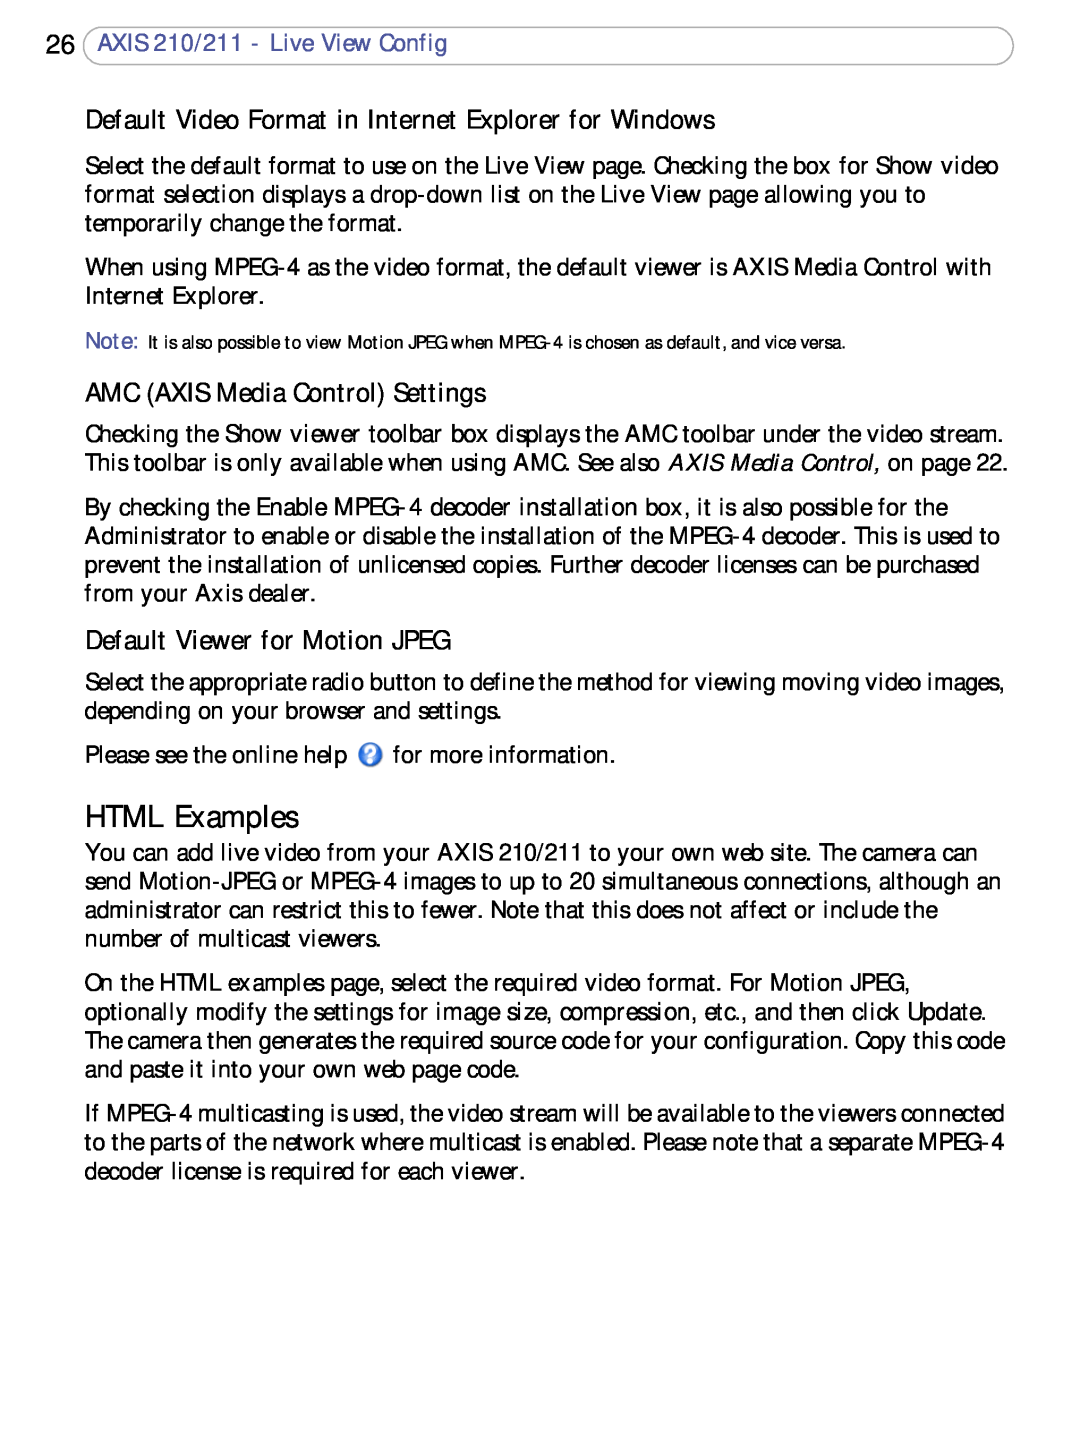 Axis Communications 210/211 user manual HTML Examples, Default Video Format in Internet Explorer for Windows 